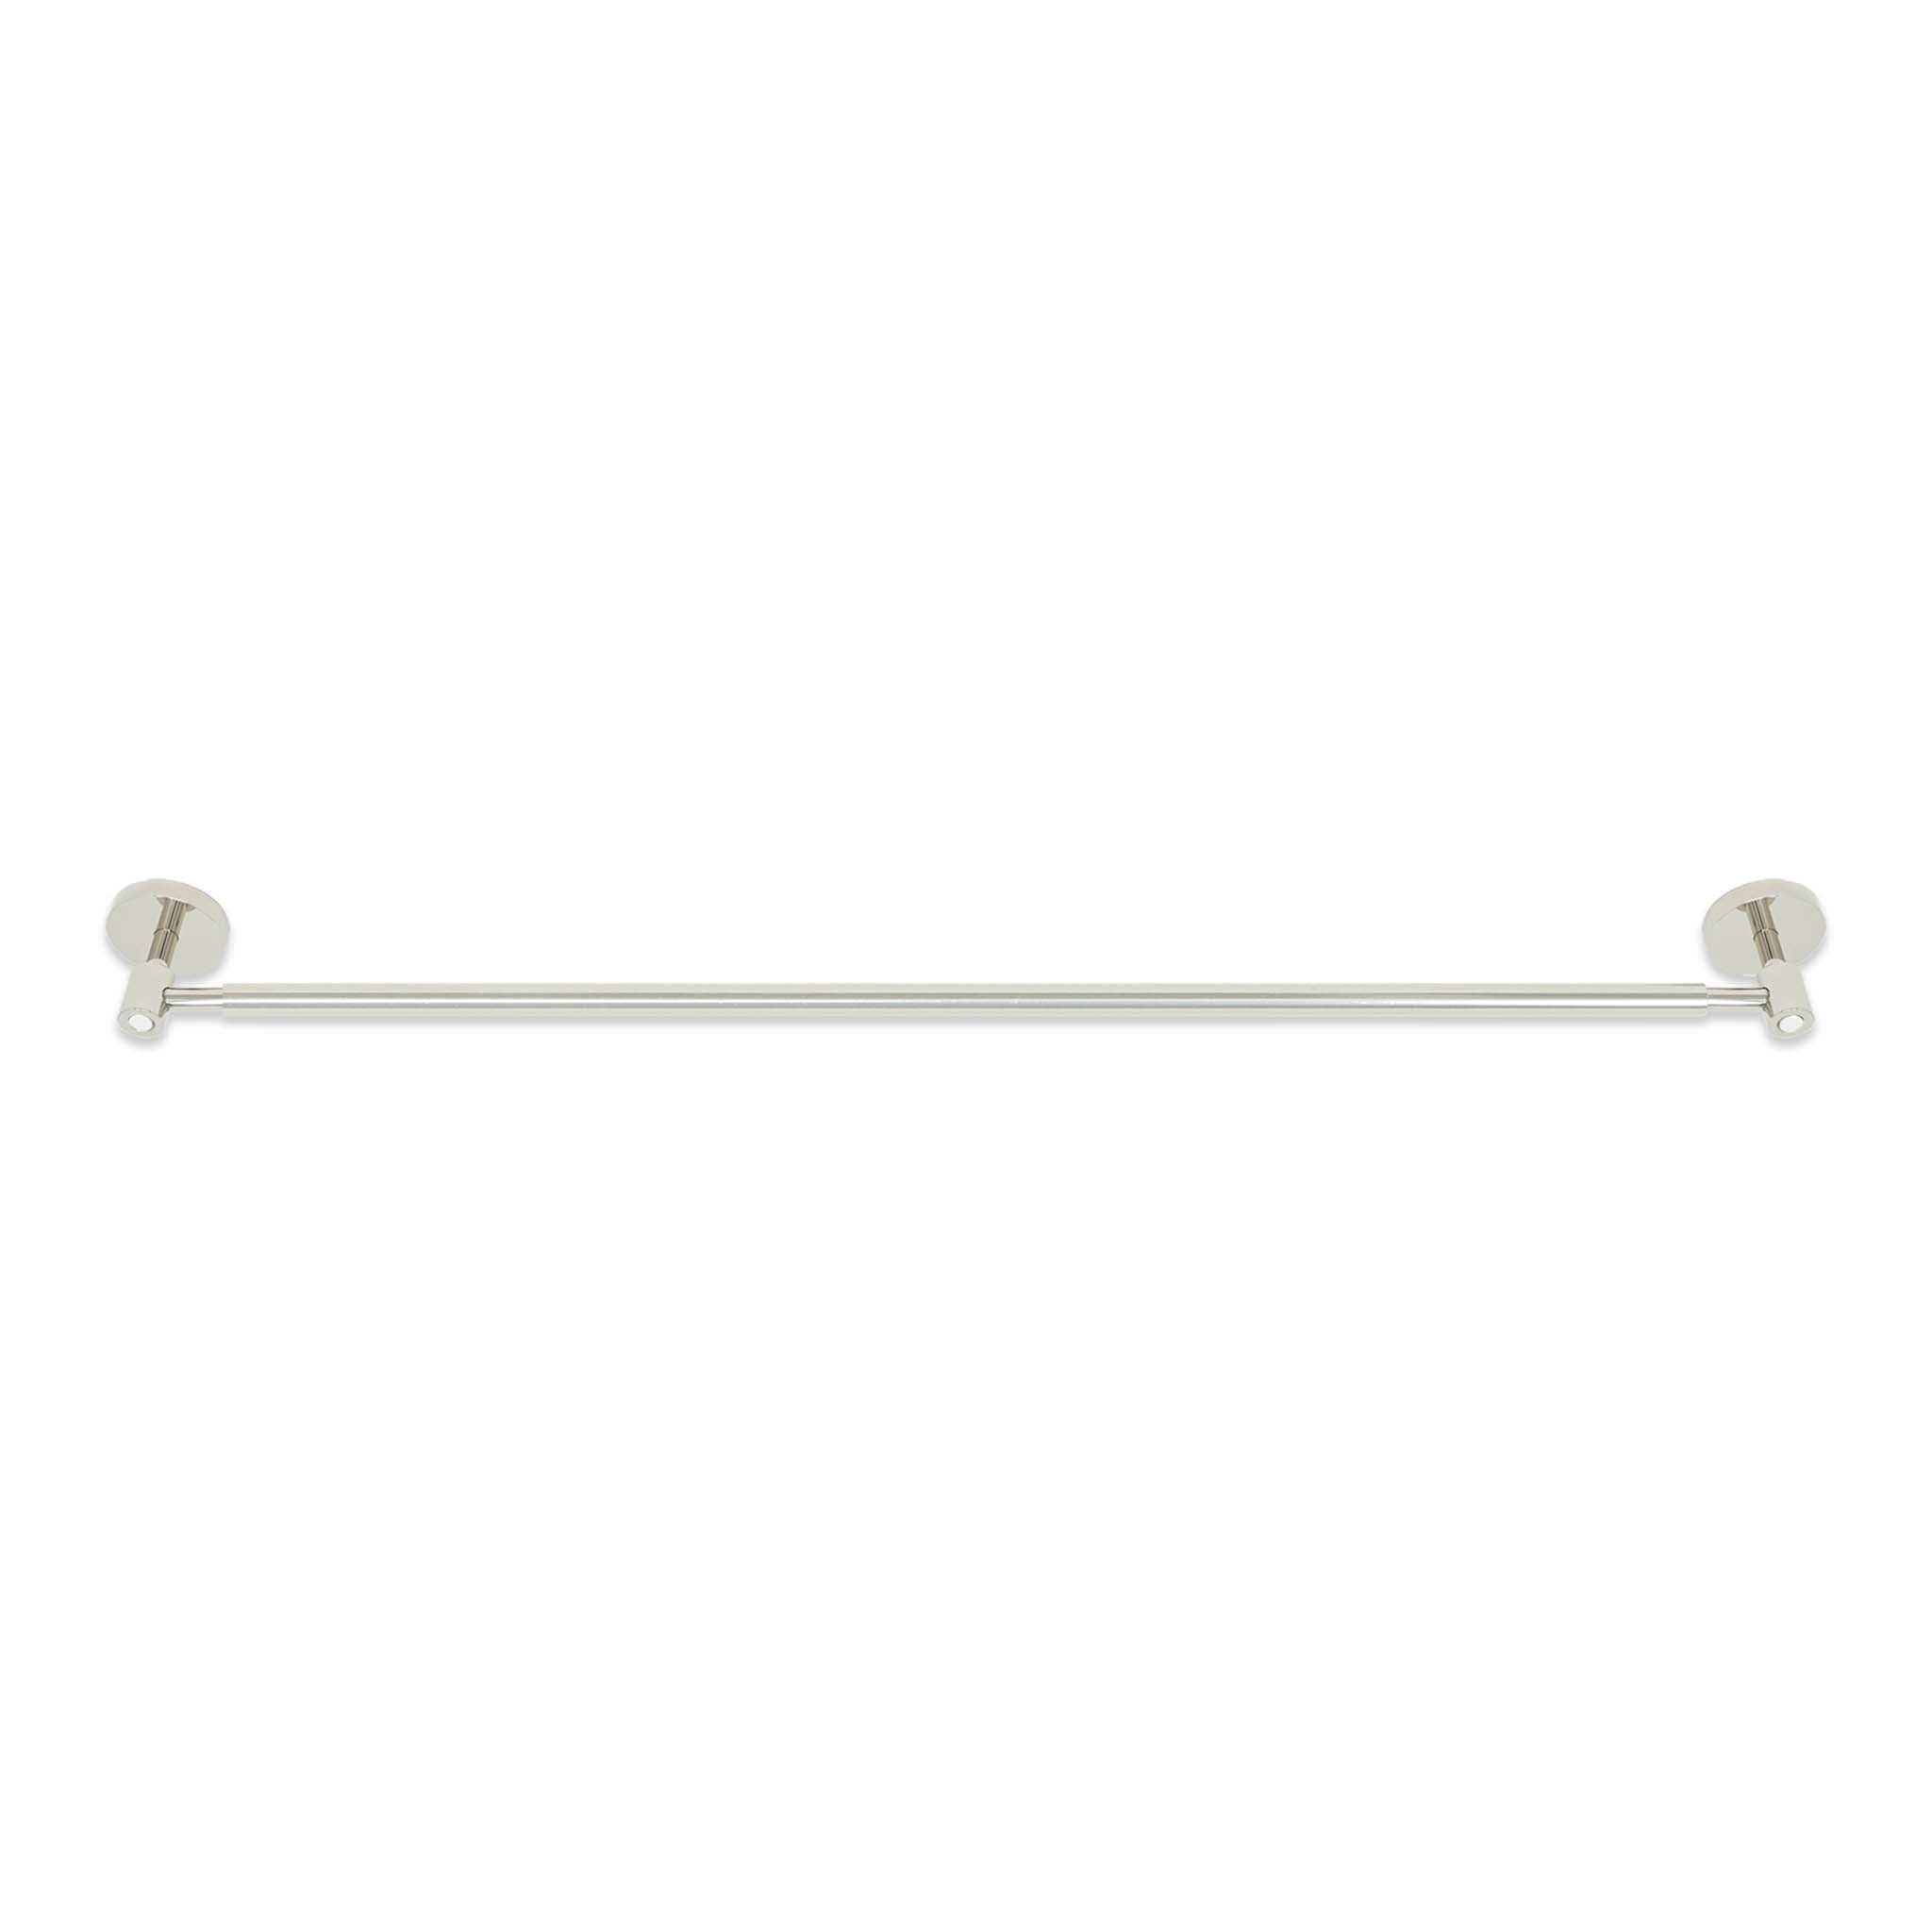 Nickel and white color Head towel bar 24" Dutton Brown hardware